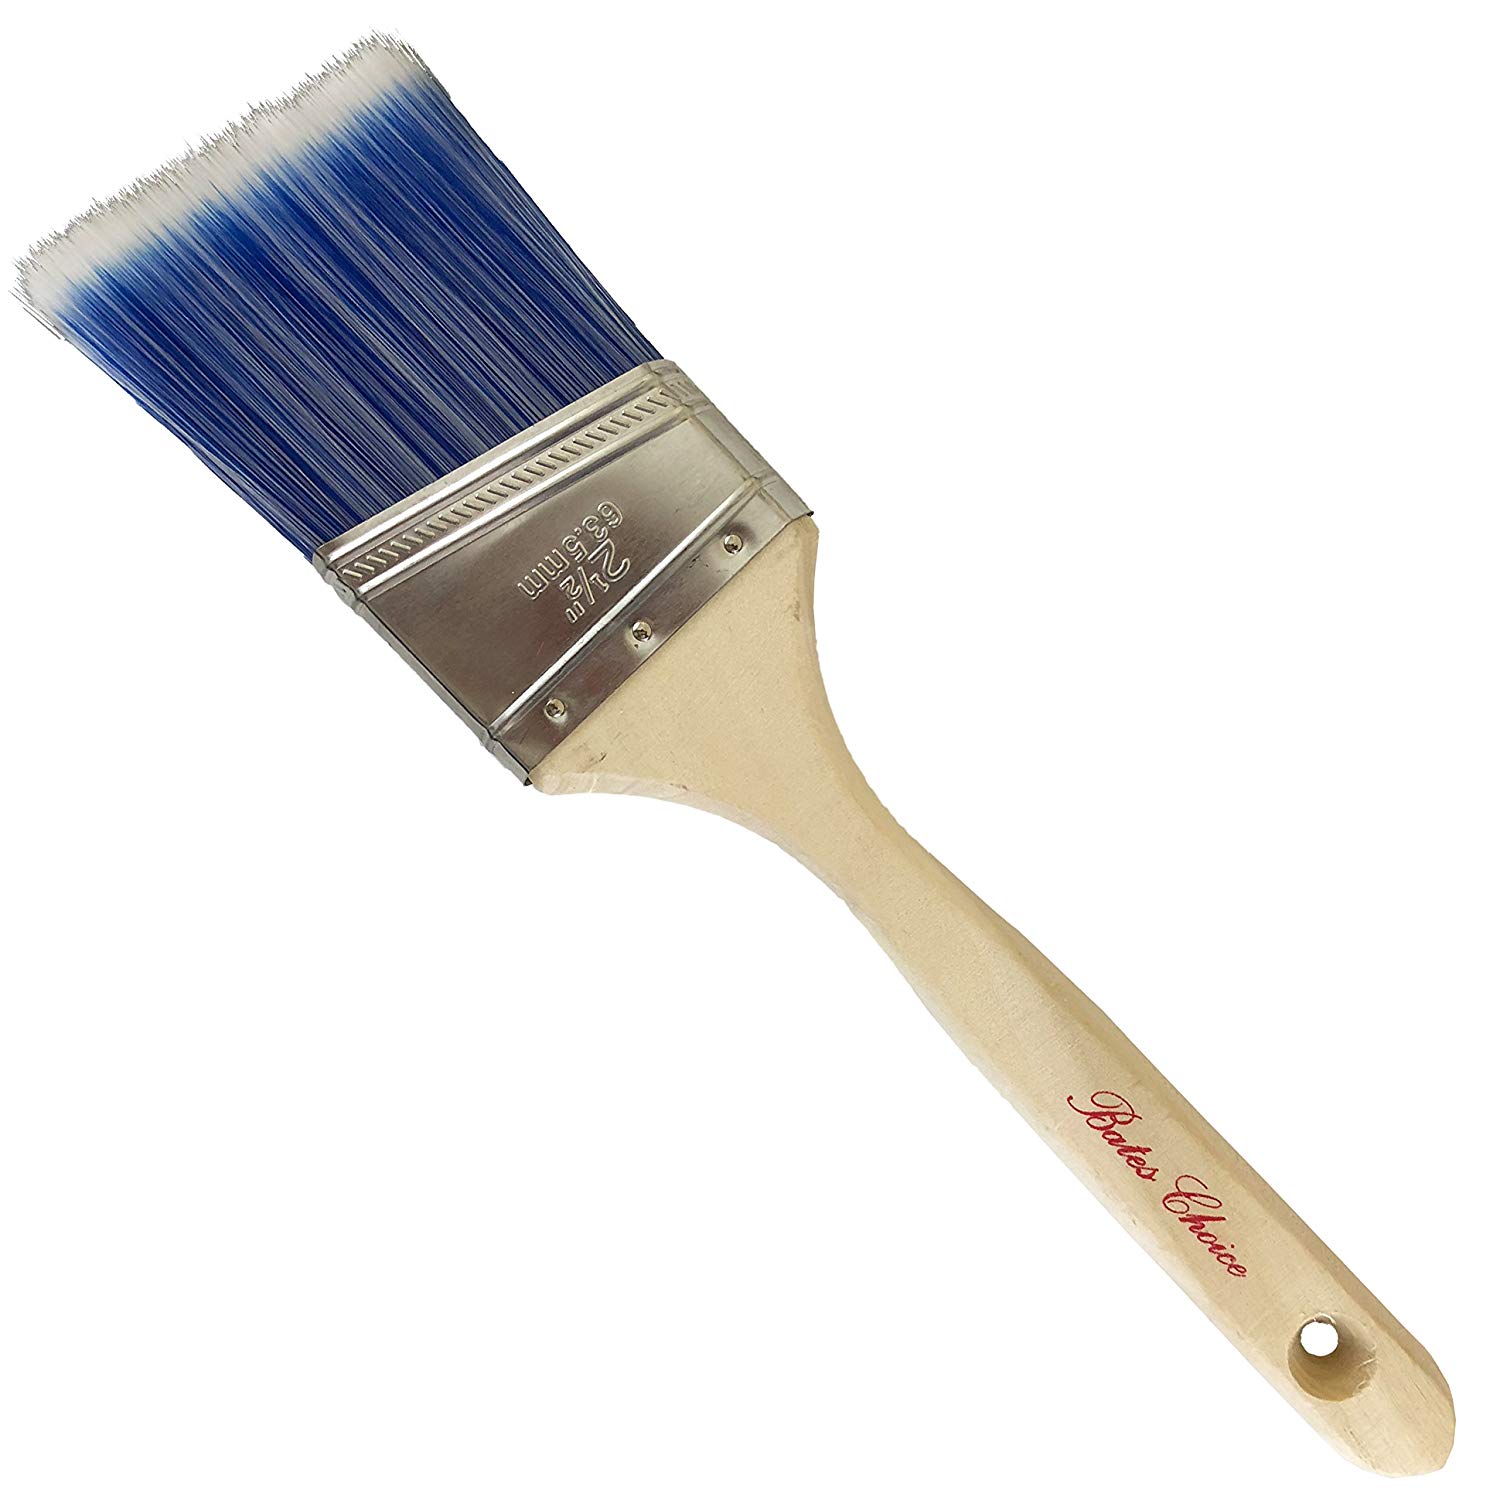 48PK 2.5"Angle House Wall,Trim Paint Brush Set Home Exterior or Interior Brushes 